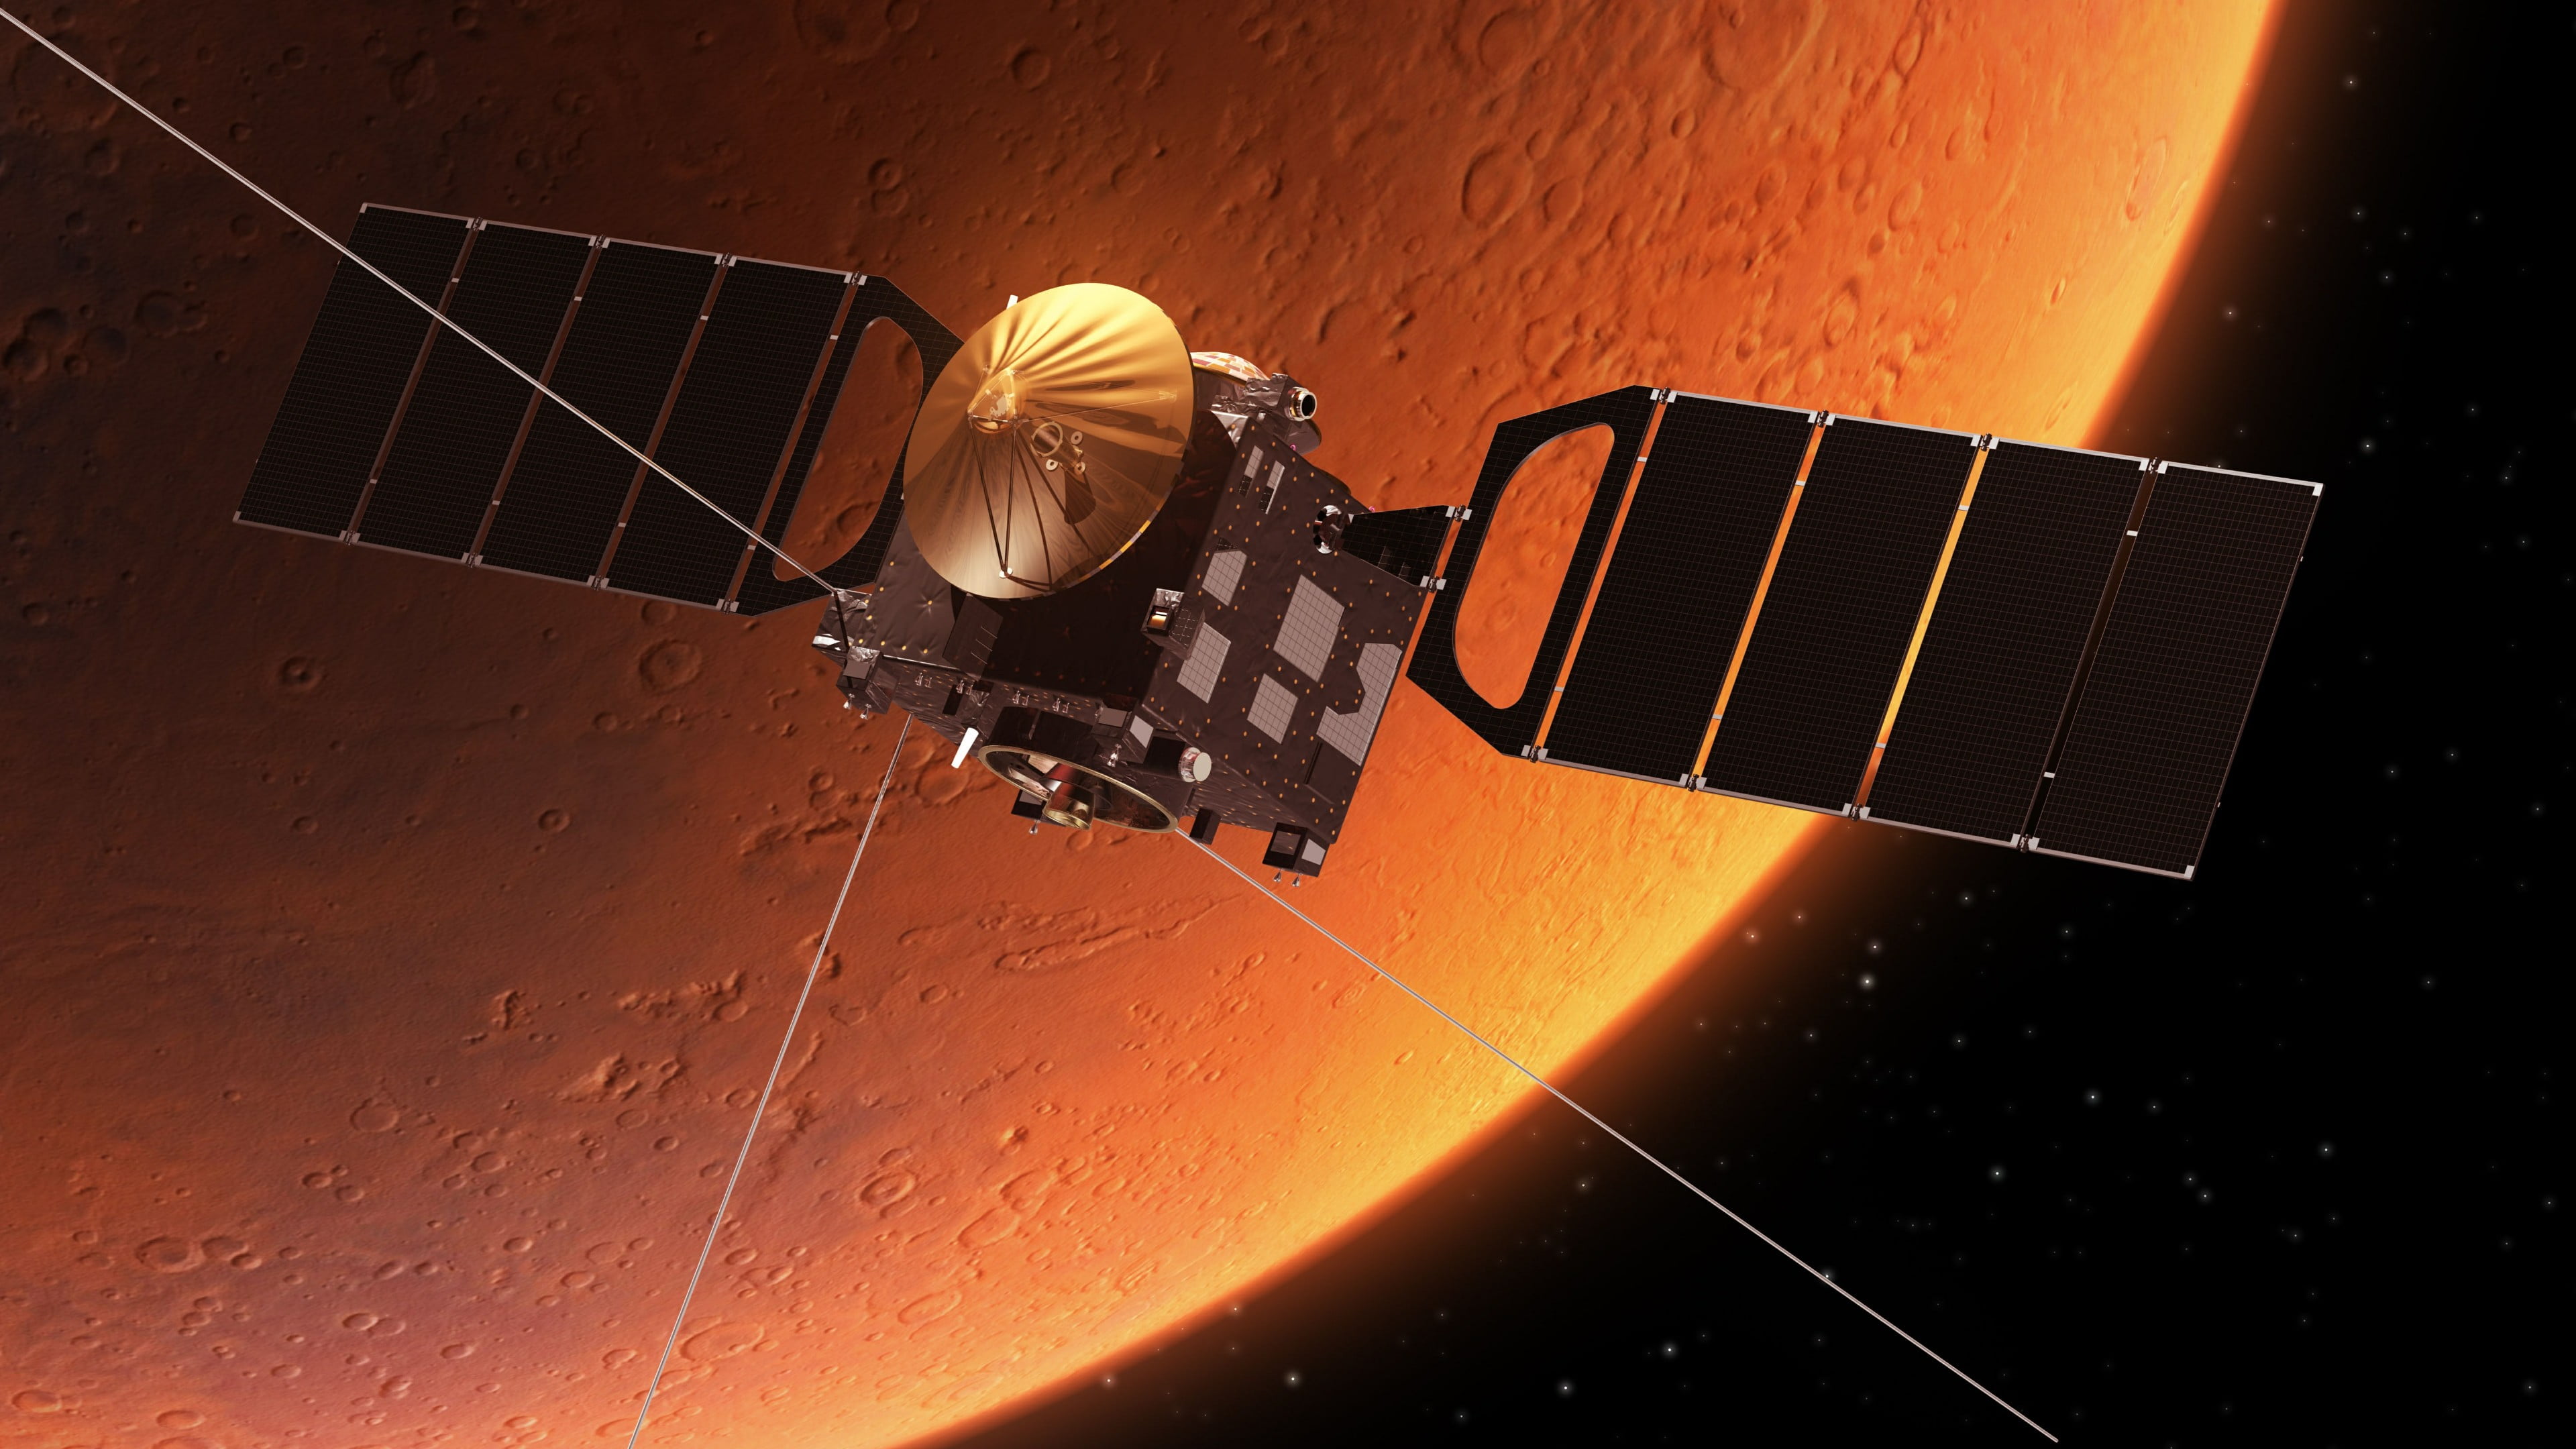 mars orbiter mission, satellite, planet, outer space, astronomy